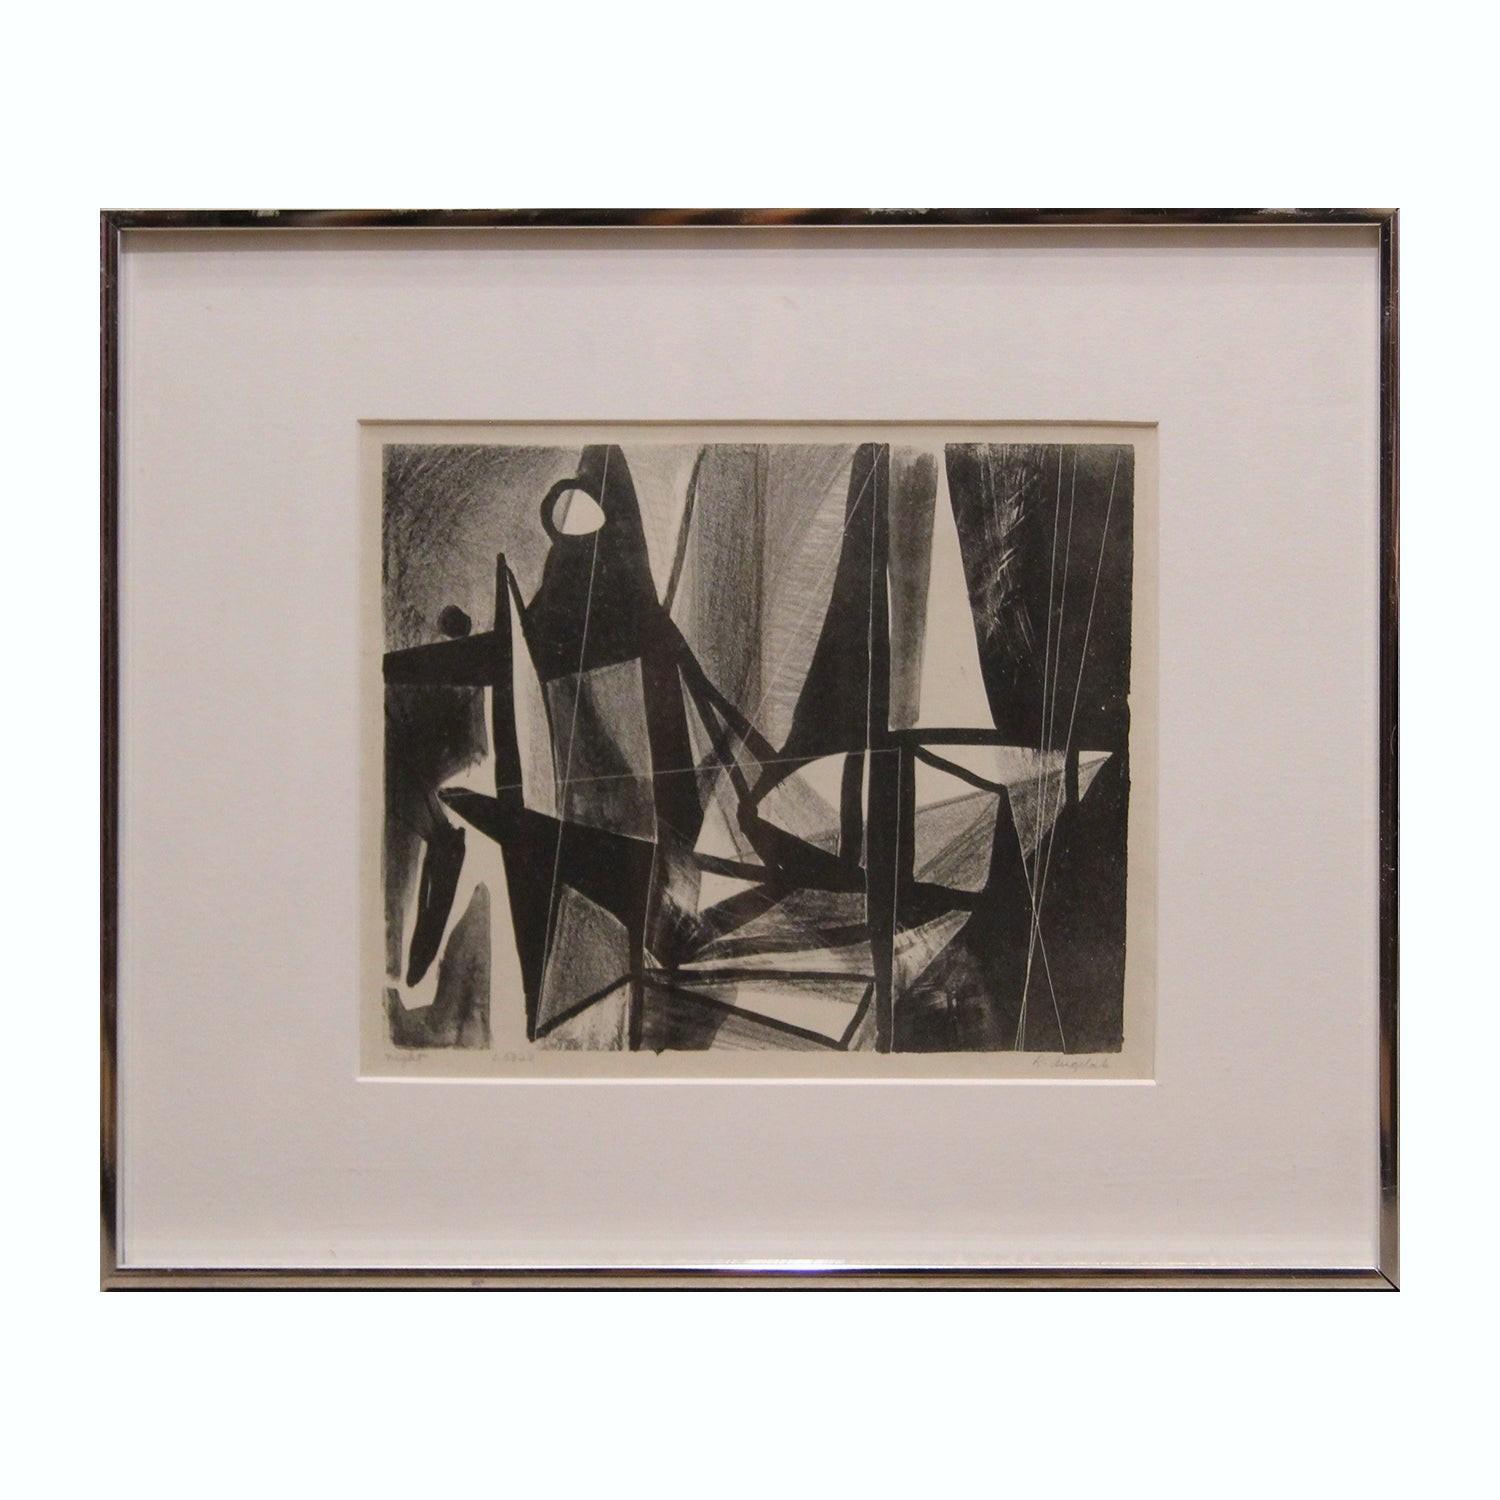 Robert Angeloch Print - "Night" Black and White Abstract Cubist Style Lithograph 3